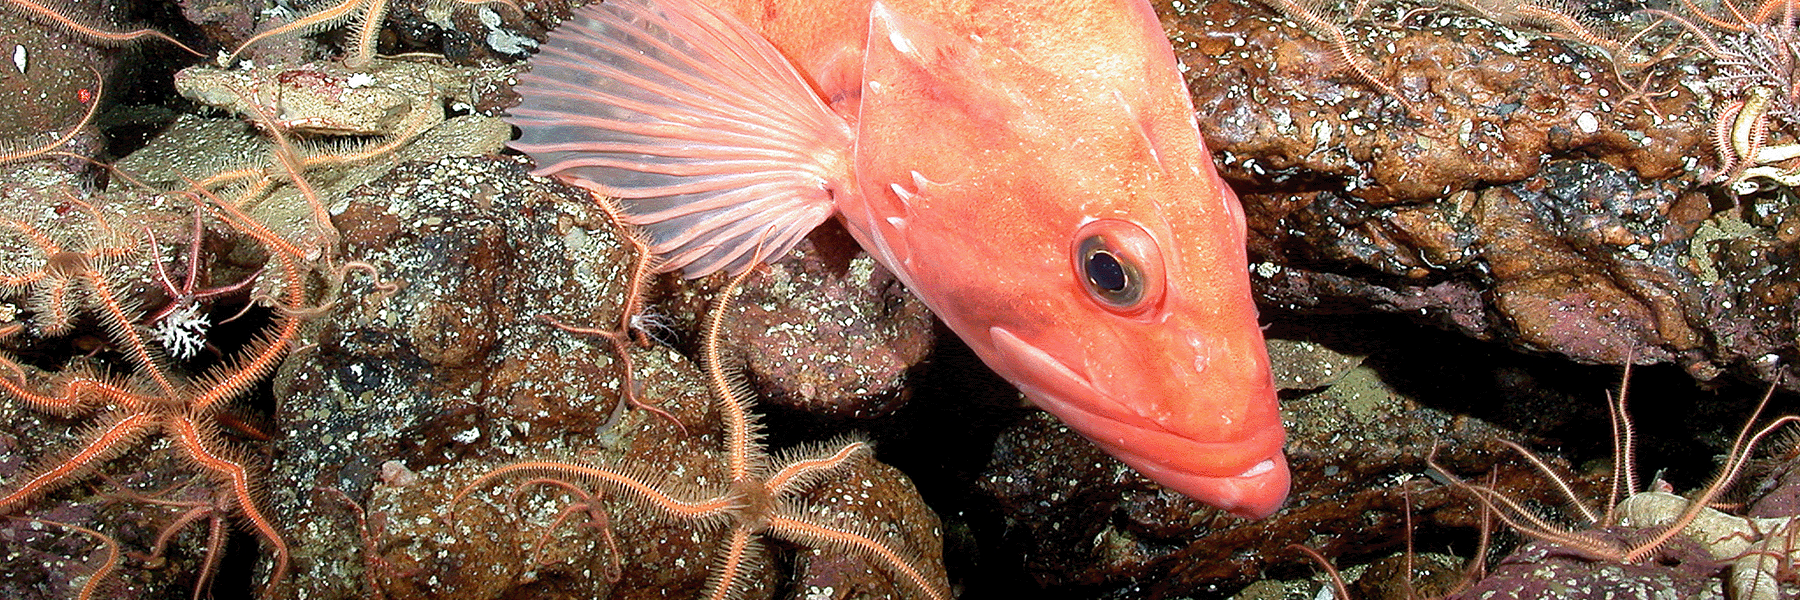 A cowcod rockfish, link to article